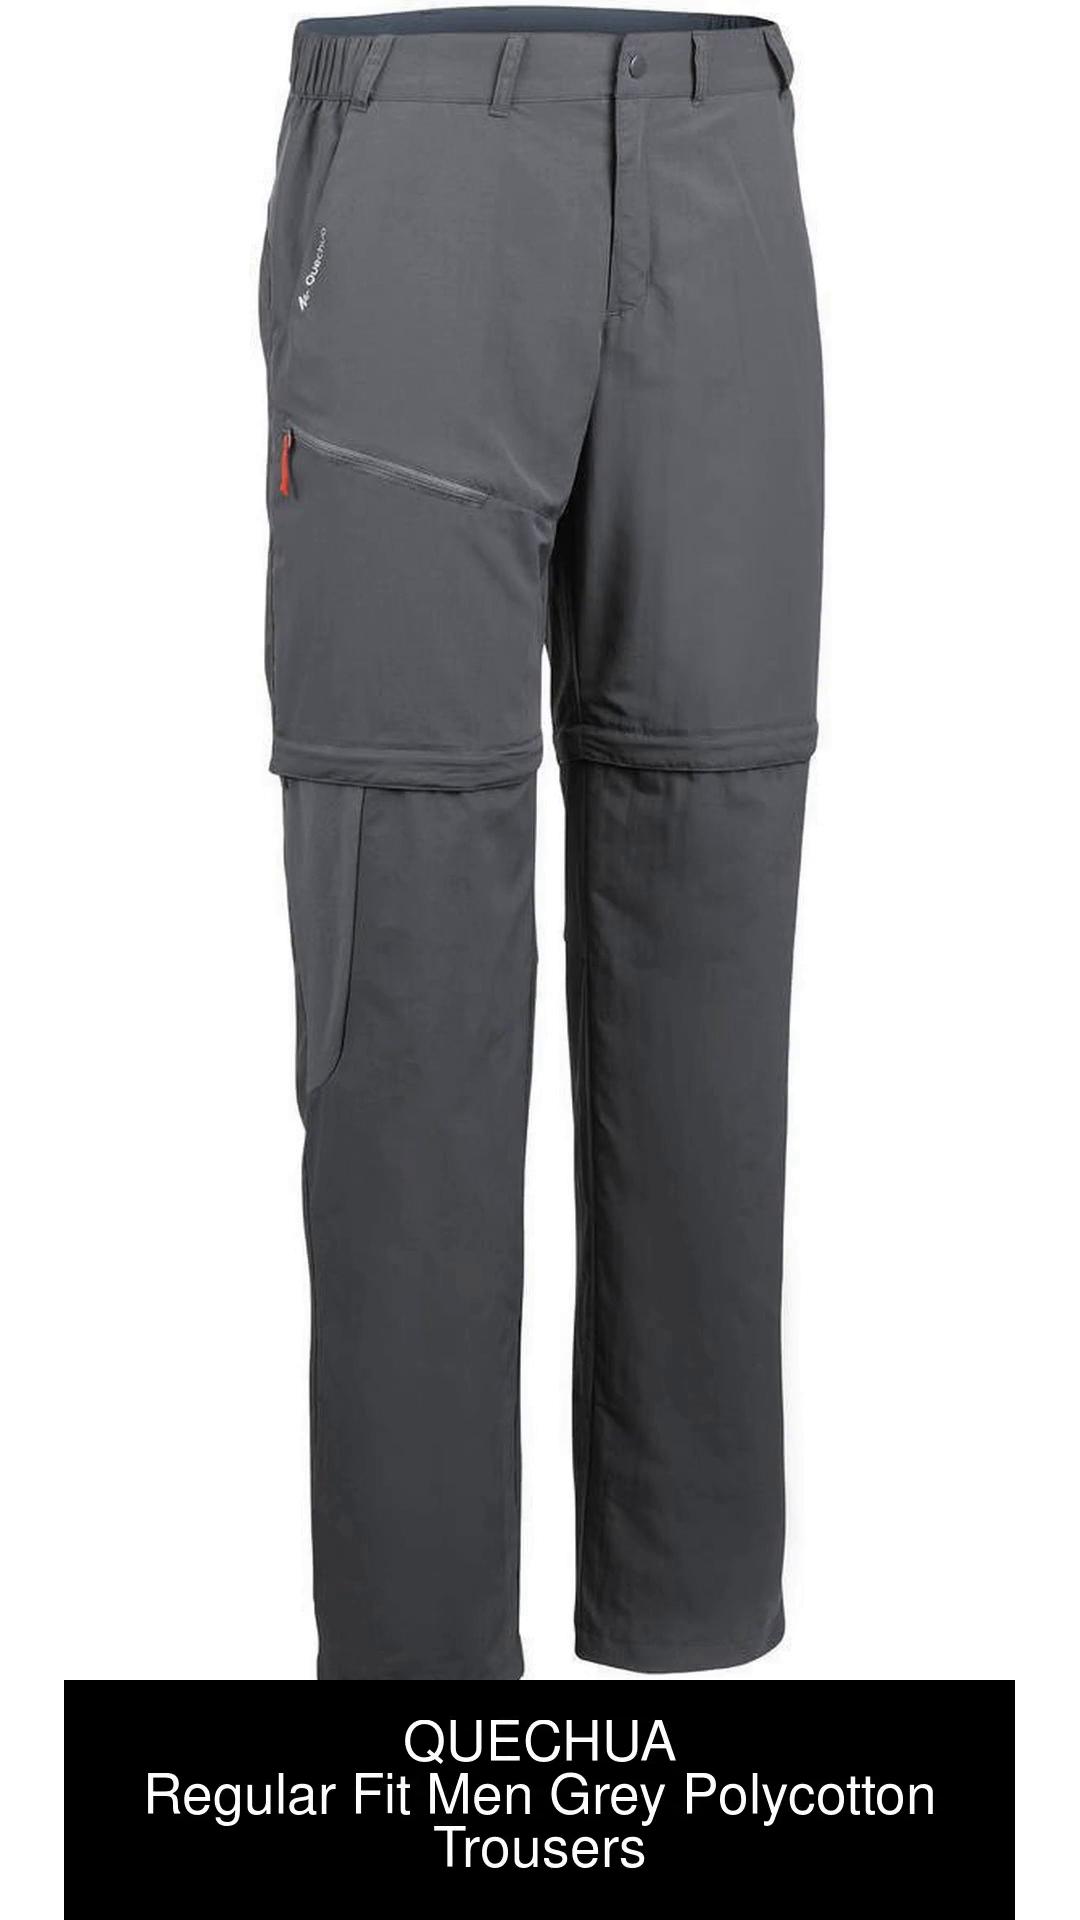 Buy Women's Mountain Hiking Trousers MH500 Online